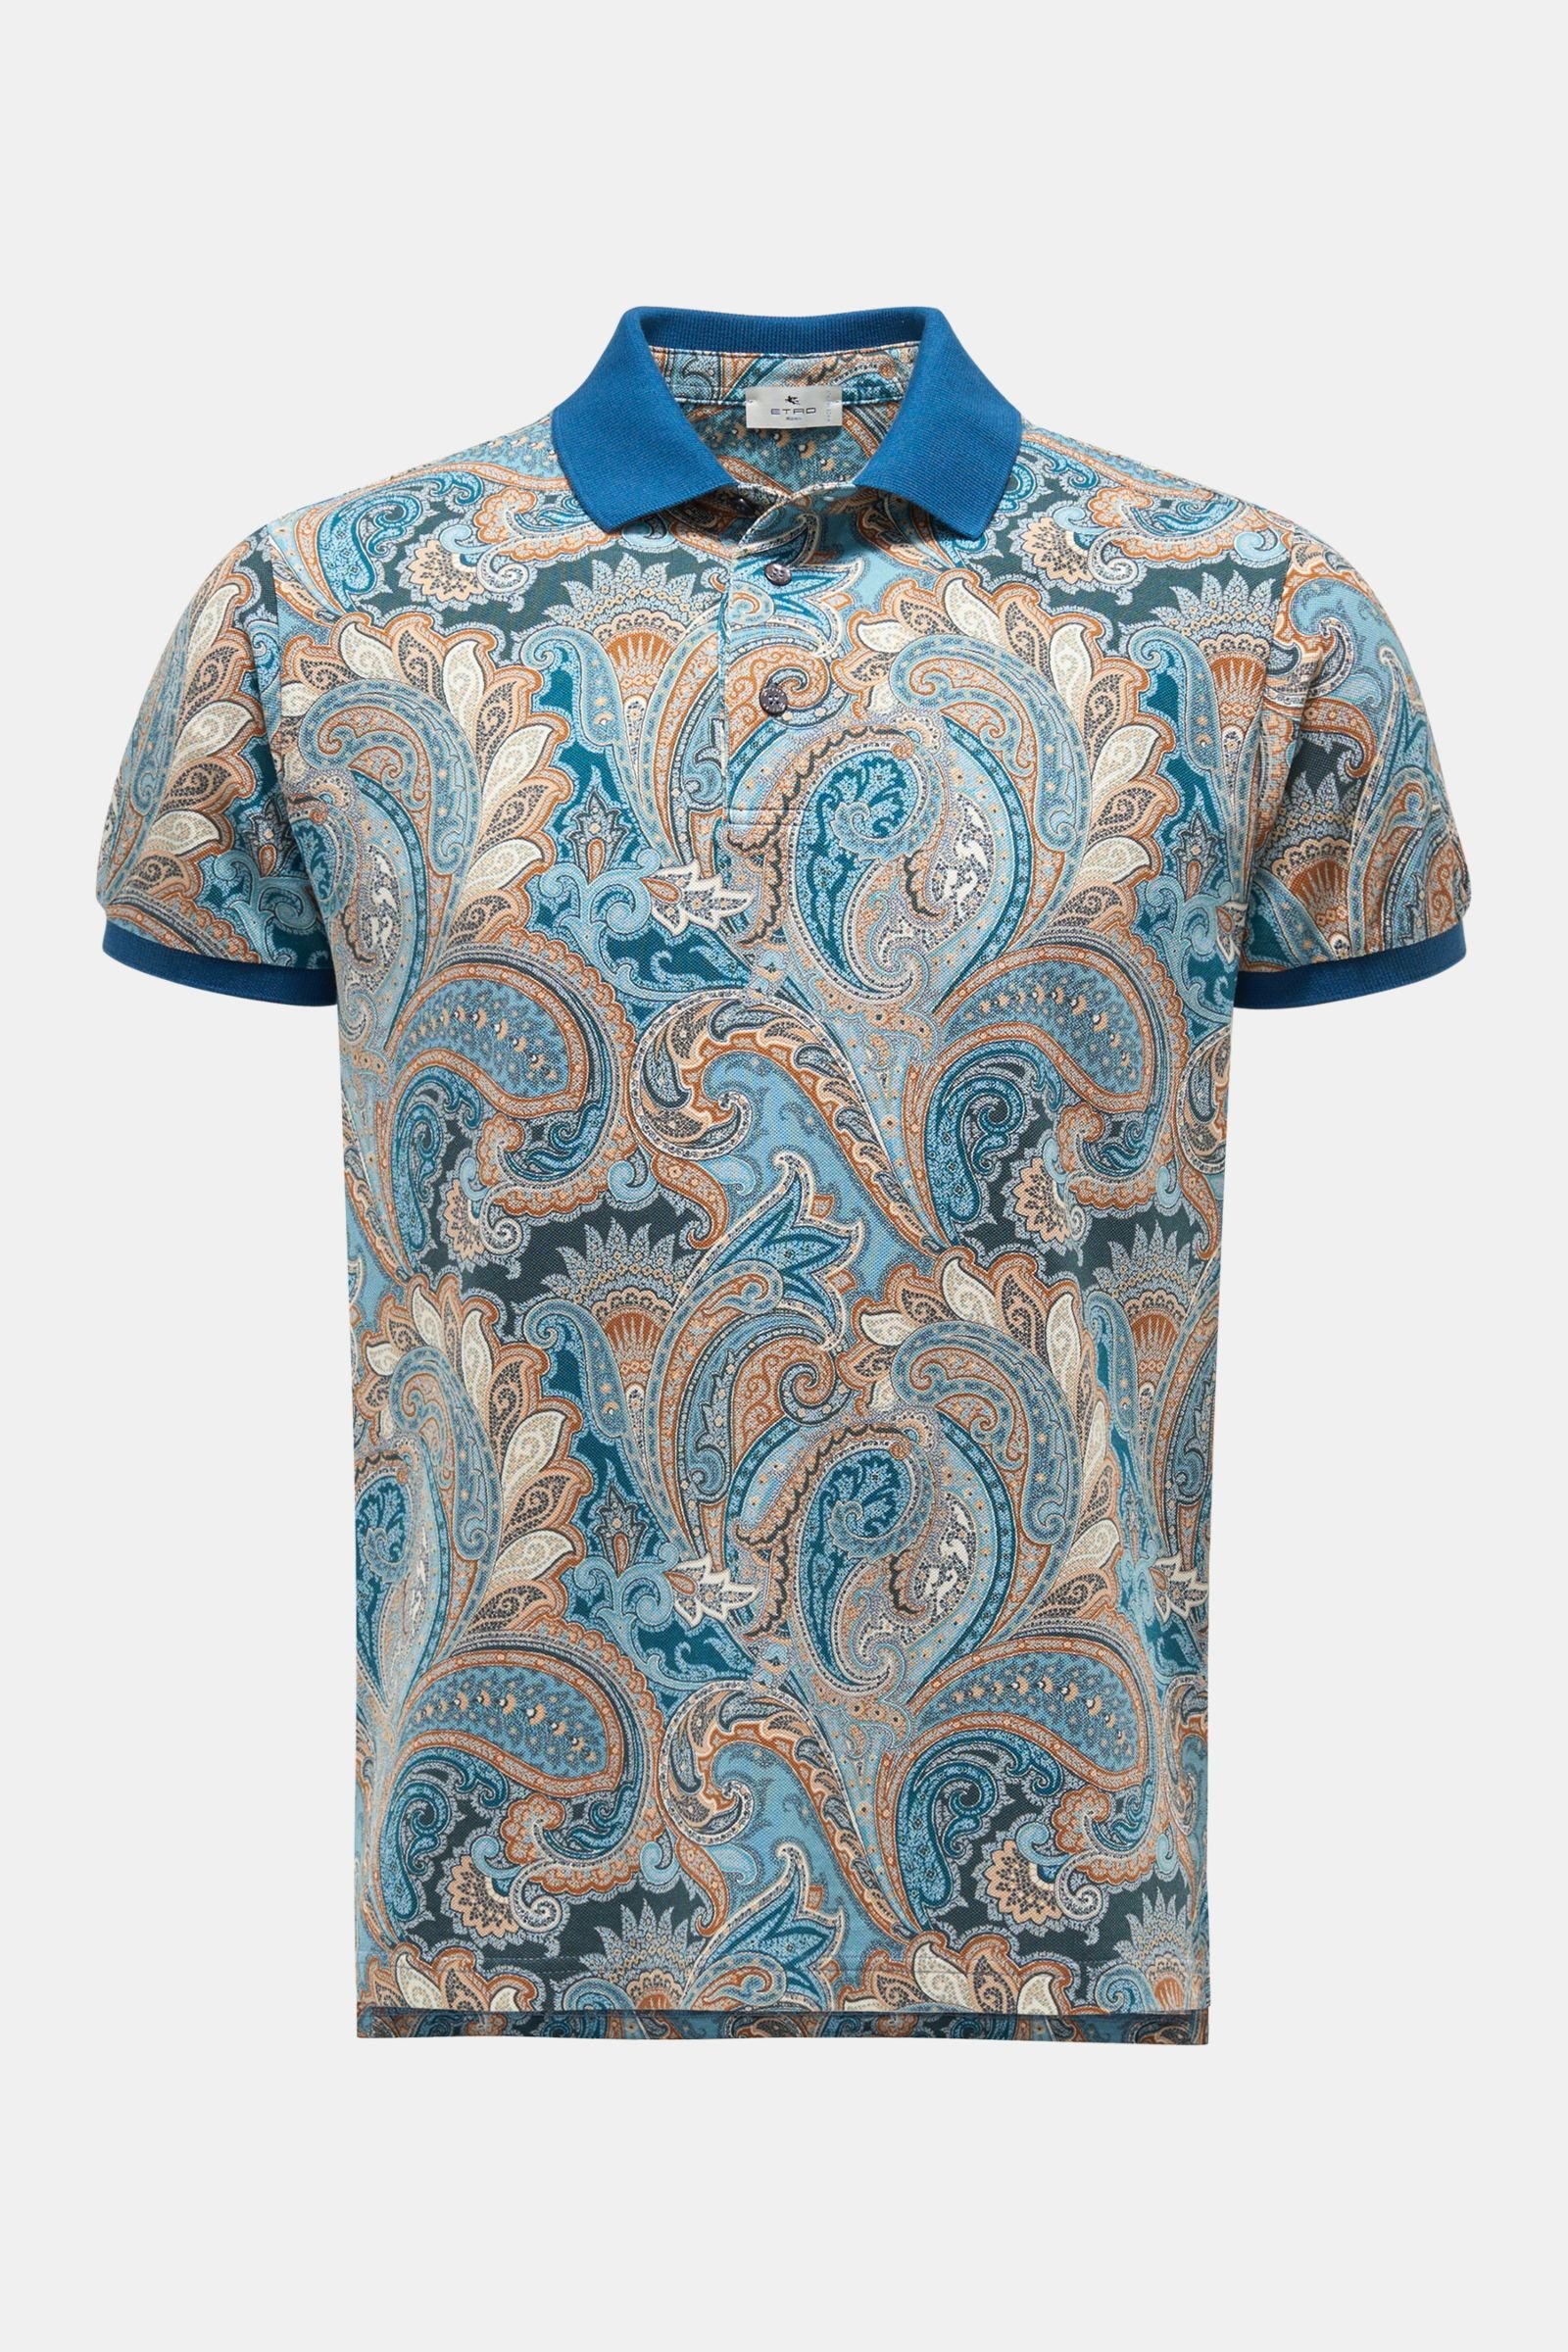 Polo shirt smoky blue/brown patterned